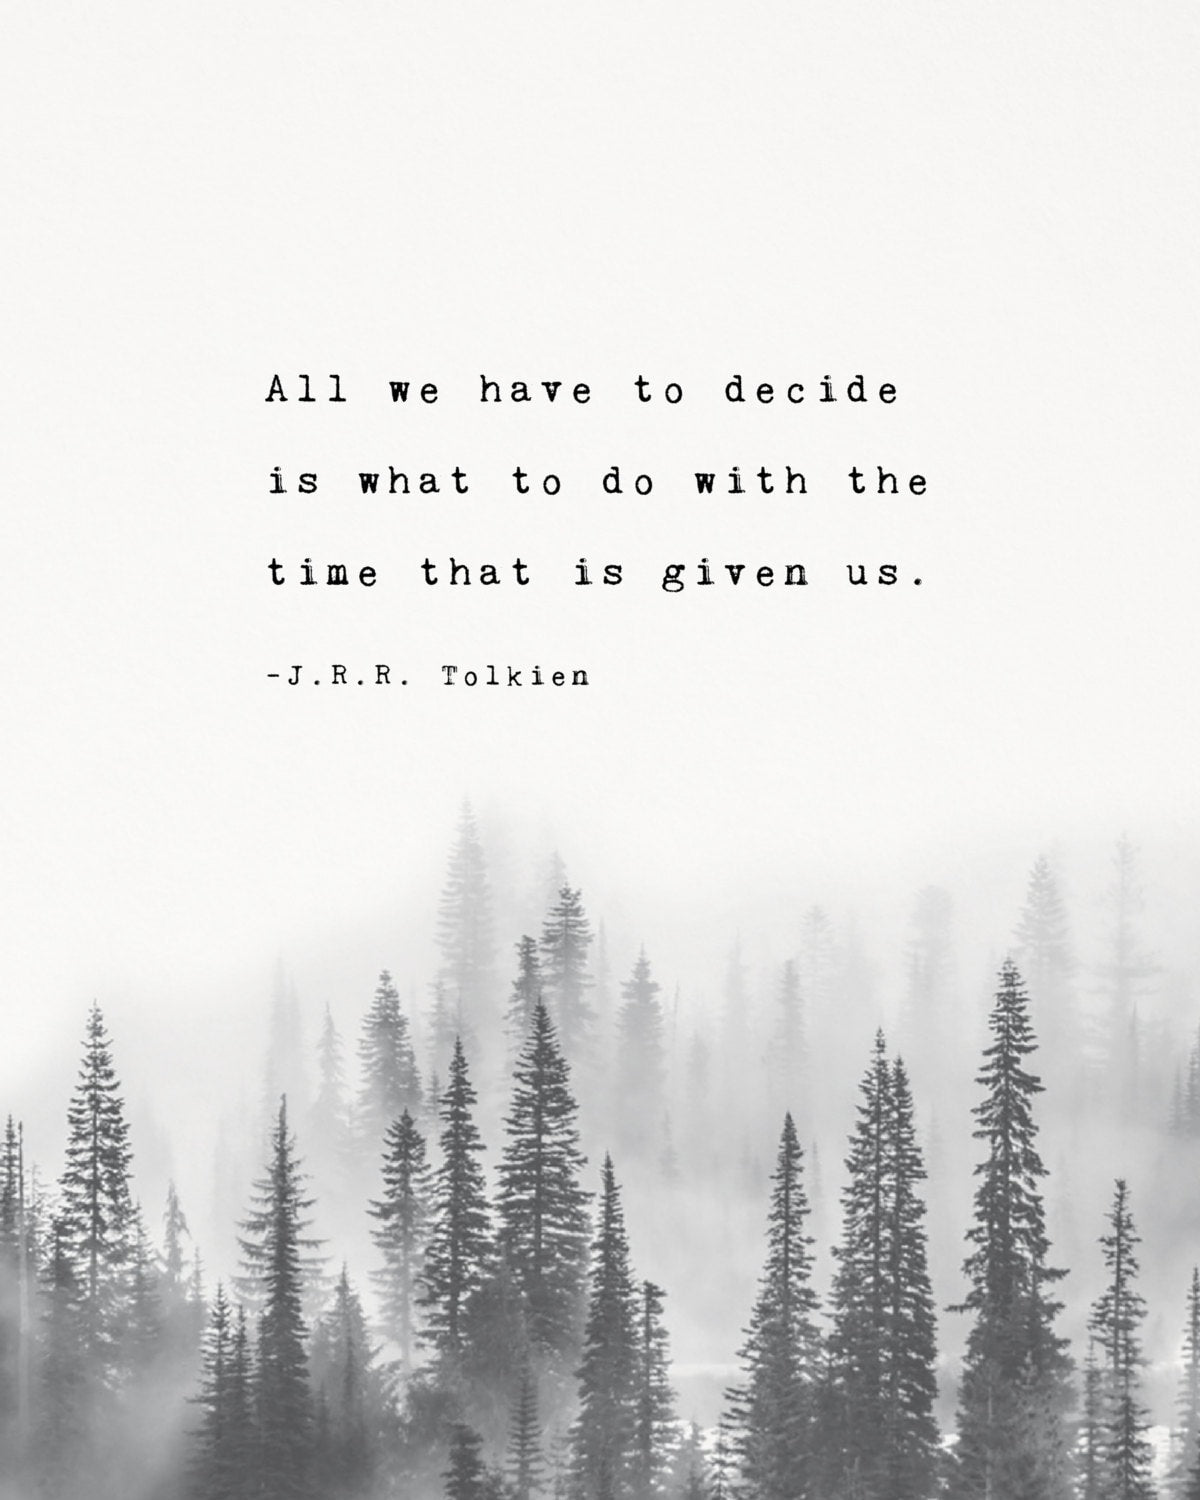 J.R.R. Tolkien quote print "All we have to decide is what to do with the time that is given us" art print